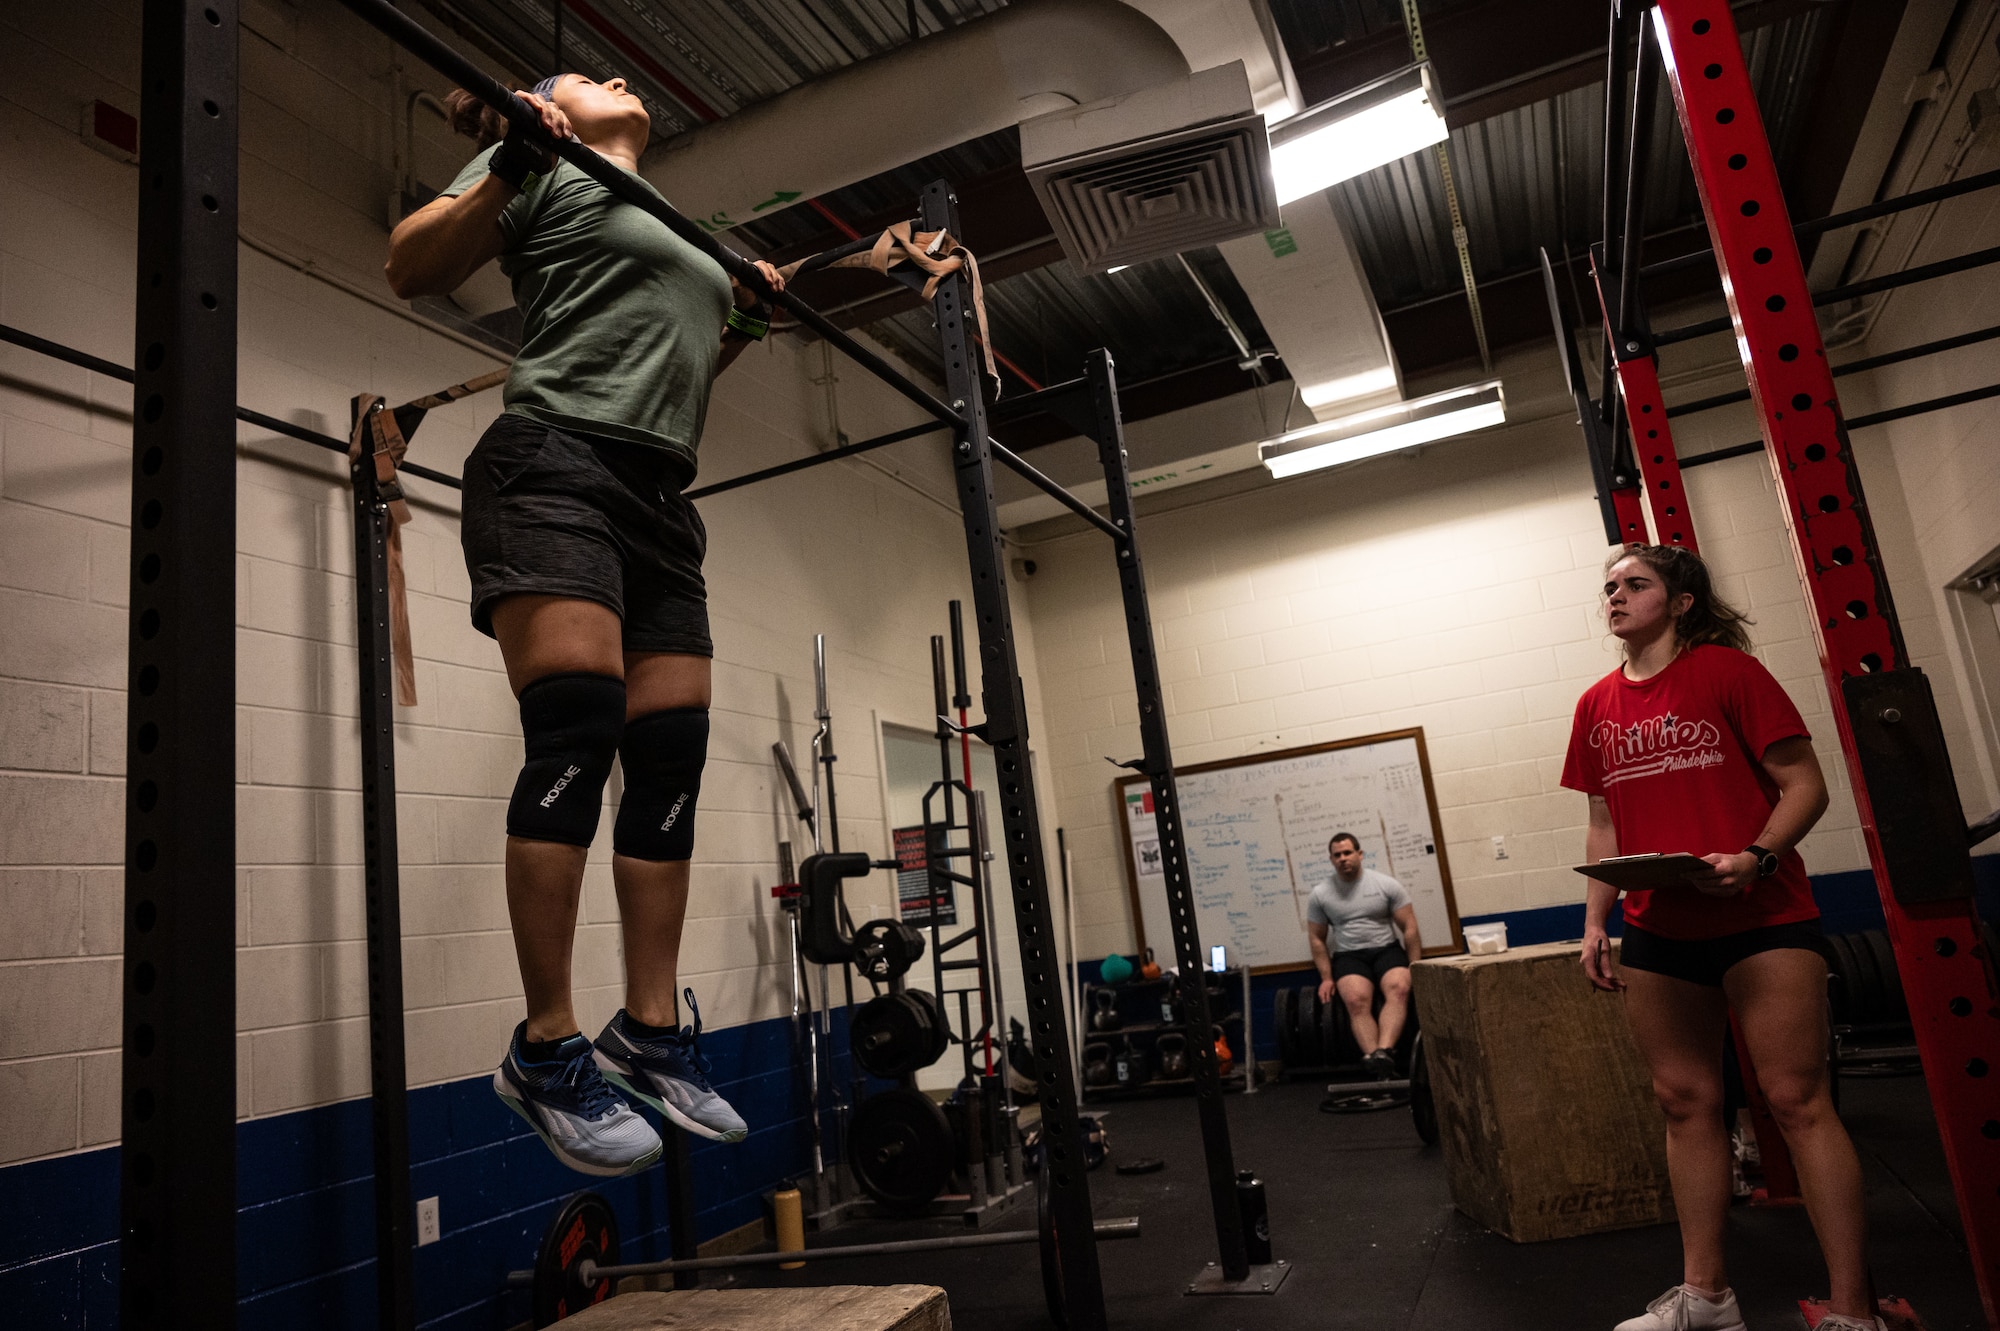 Team Dover uses CrossFit to facilitate fitness